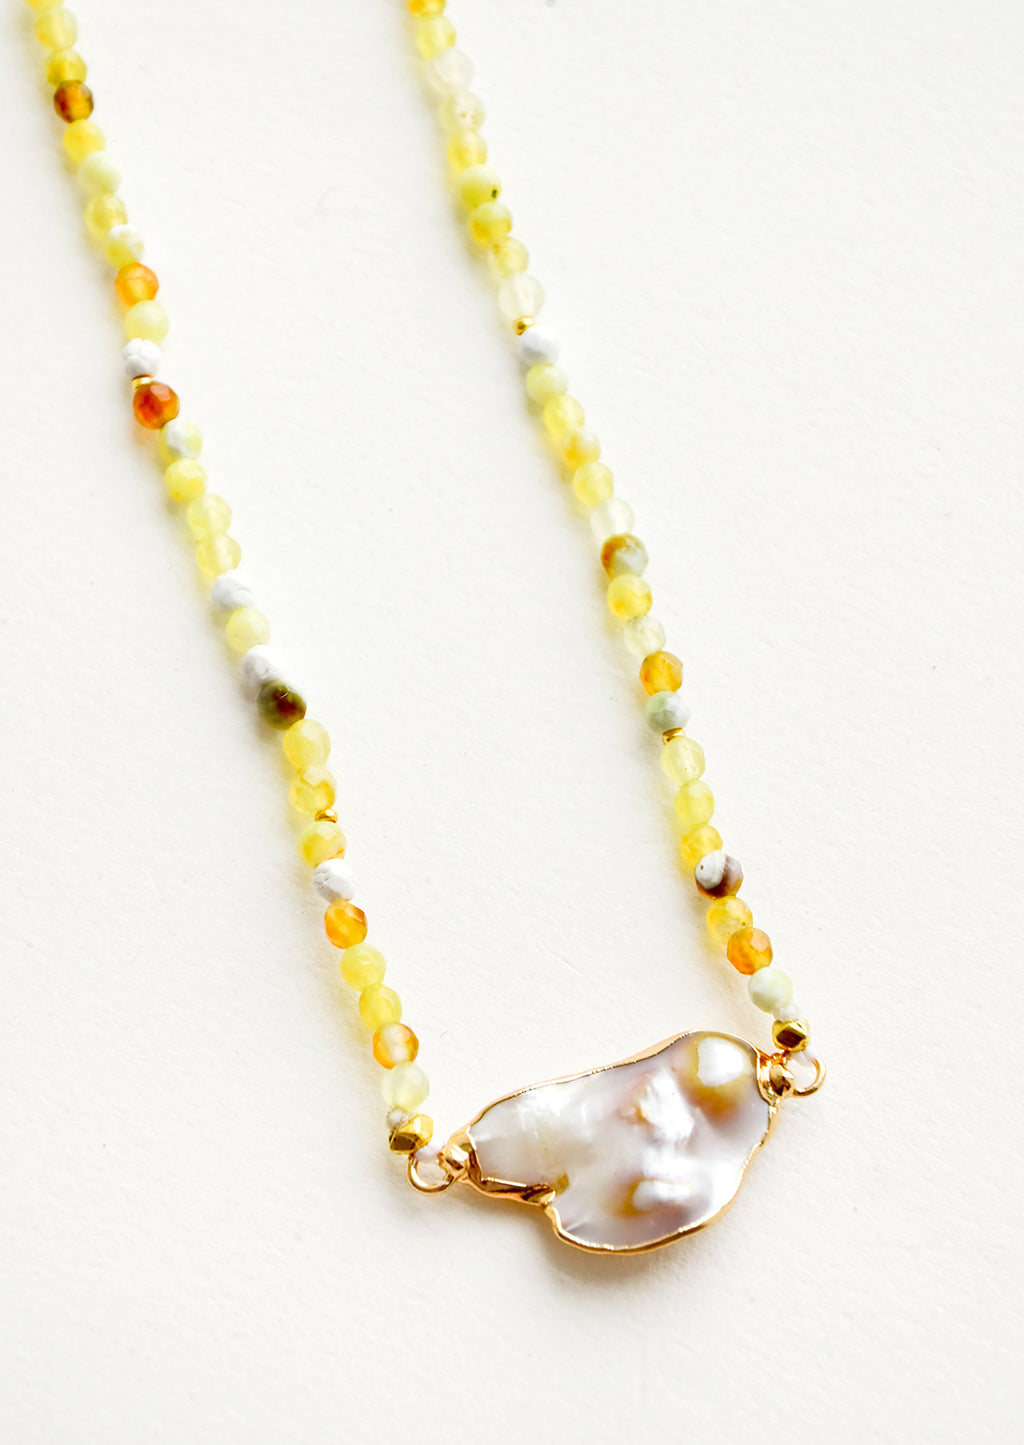 2: Gemstone beaded necklace in shades of yellow with asymmetrical grey pearl pendant at front